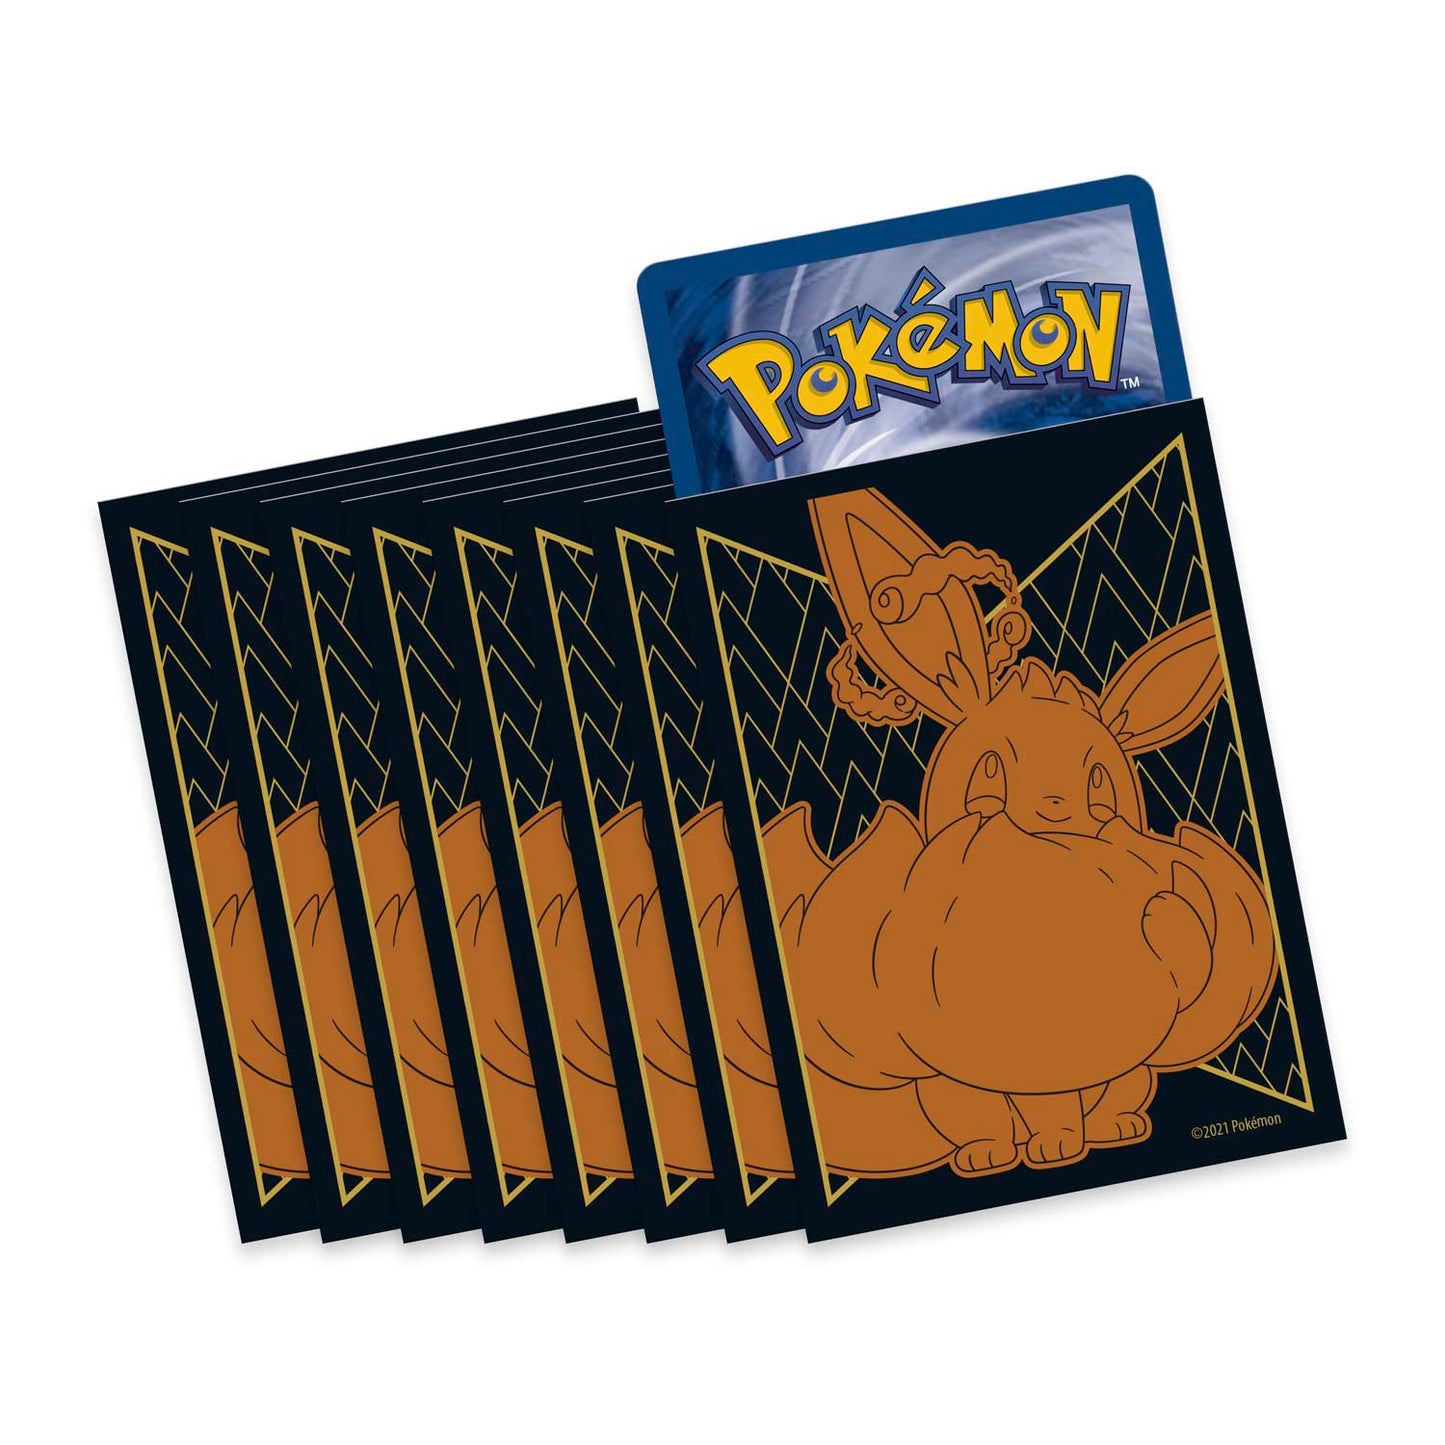 This shows an image of the Eevee-themed deck protection sleeves included in the elite trainer box.